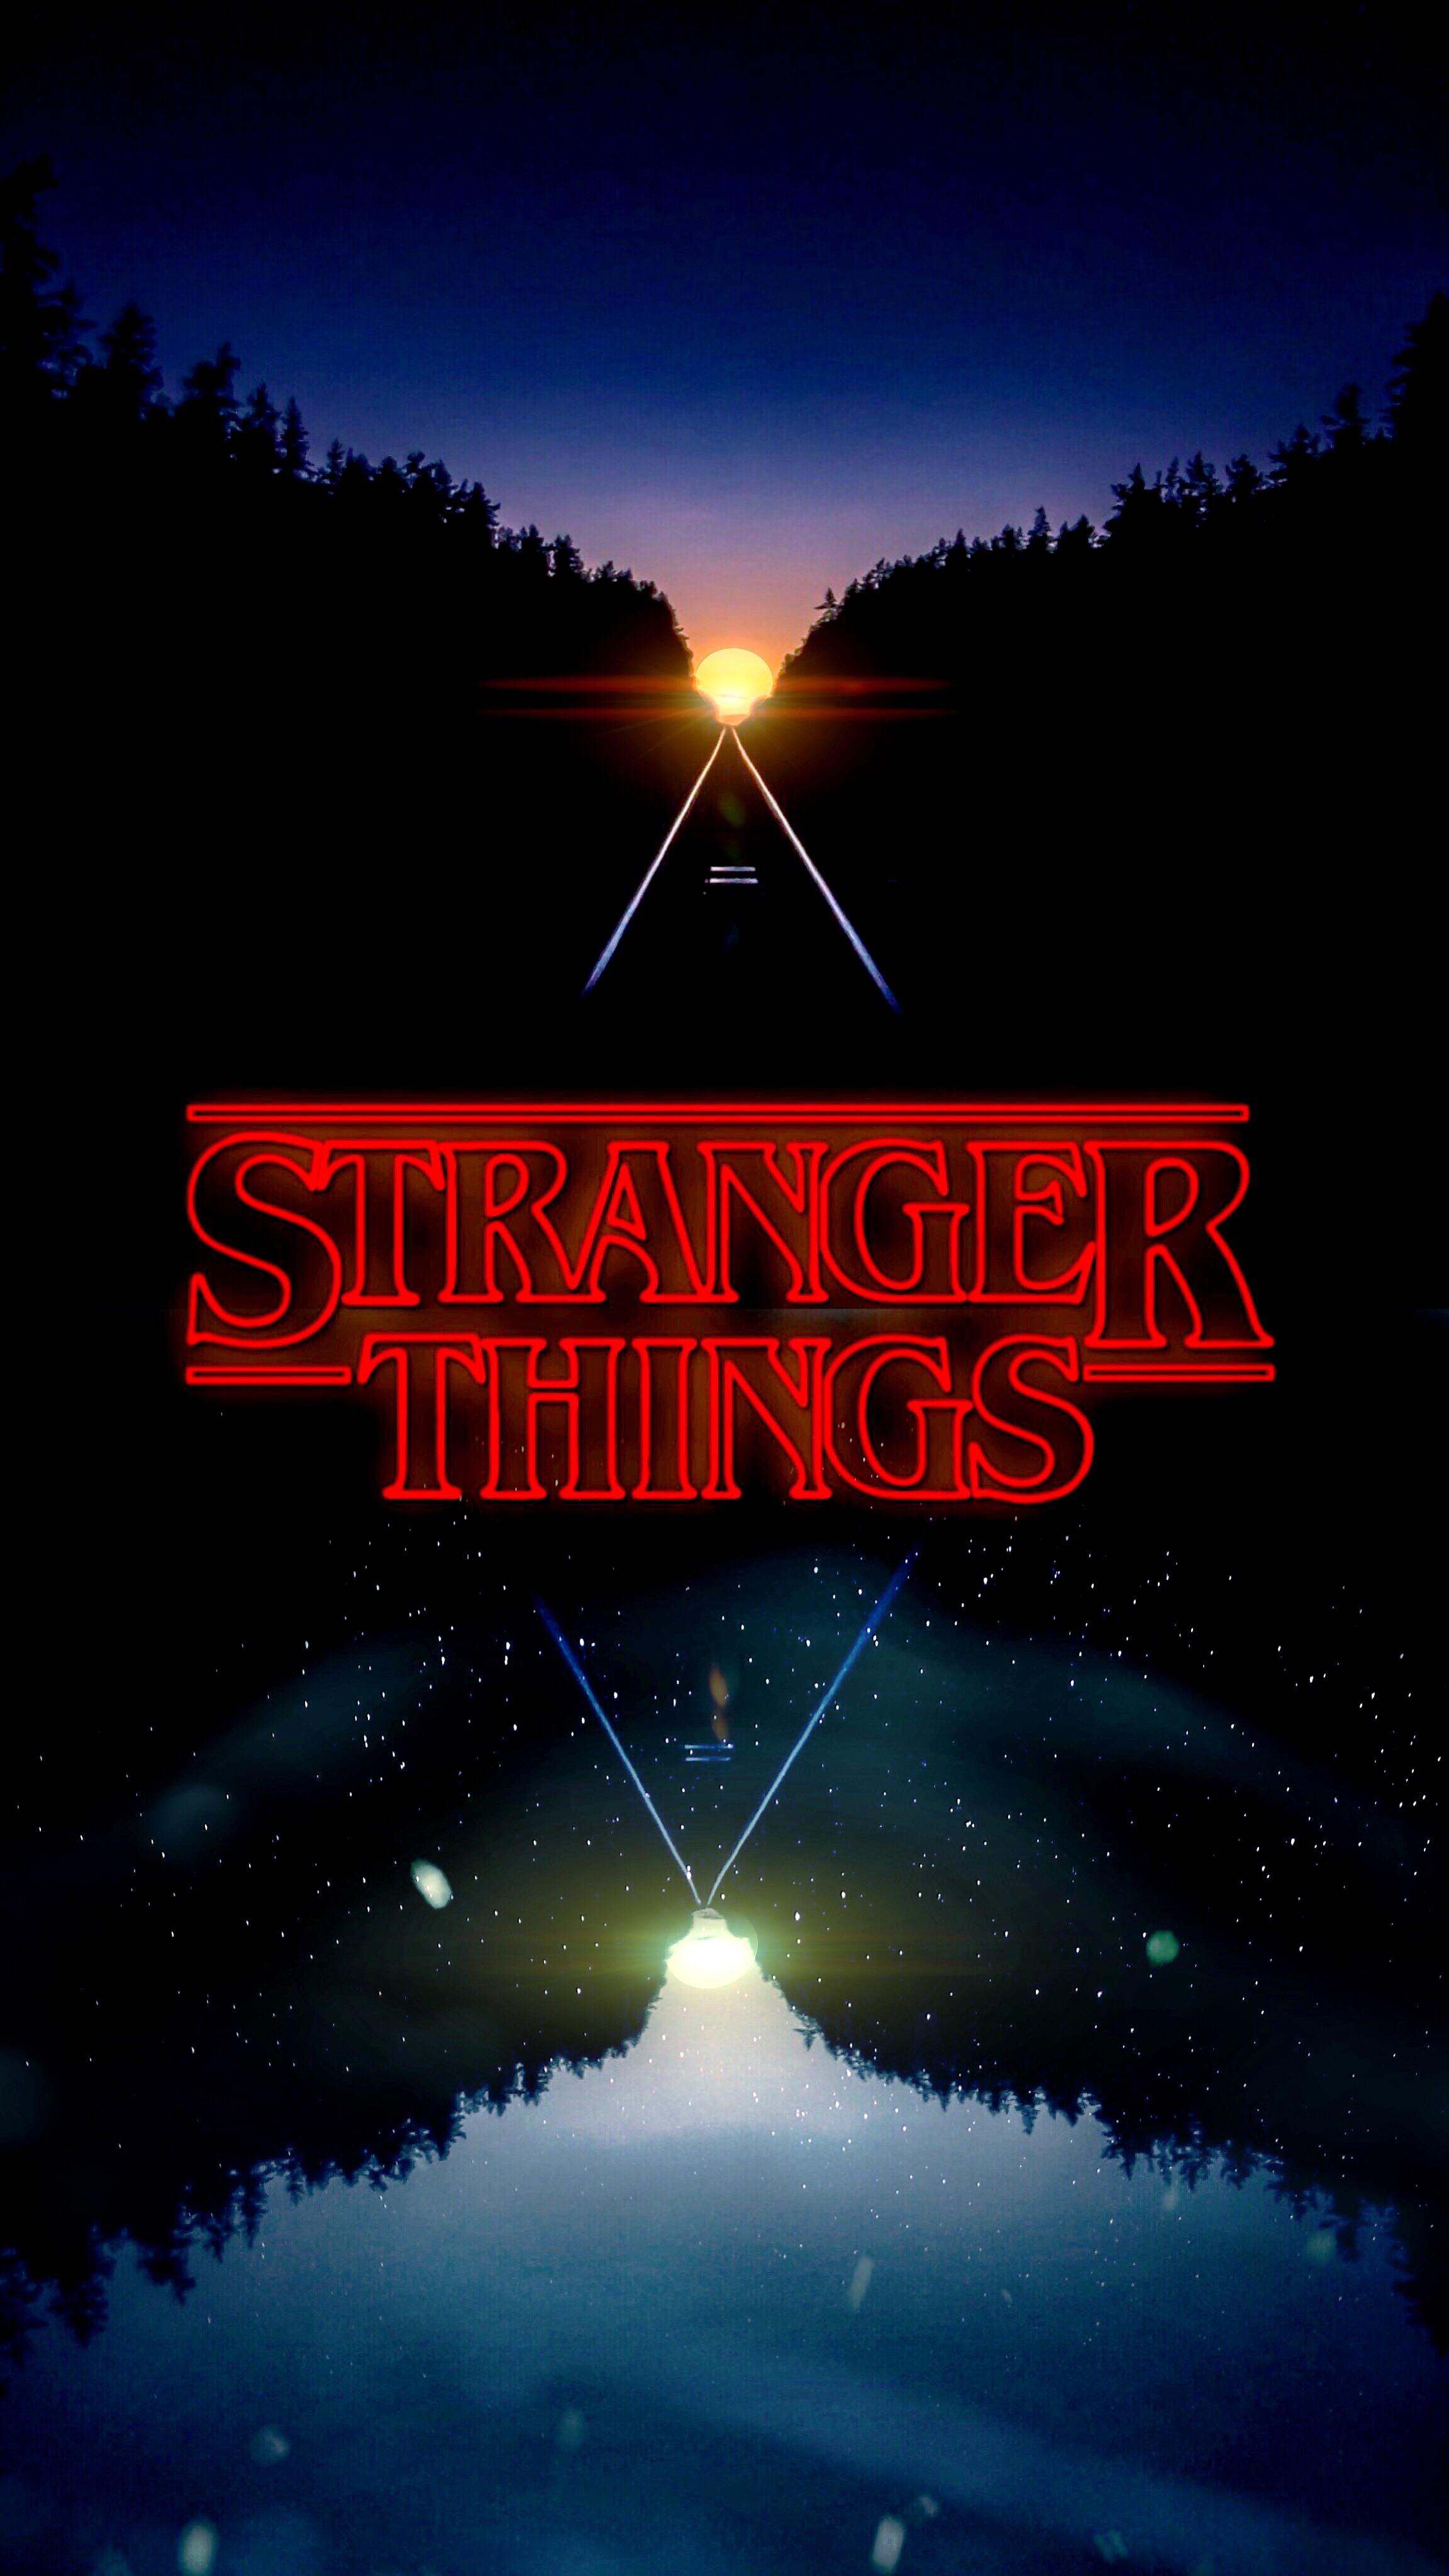 I Wanted To Create A Stranger Things Wallpaper Using Just My Phone. Many Apps And Edits Later This Was The Result. Hope You Like It! Album In Comments. Xpost From R StrangerThings